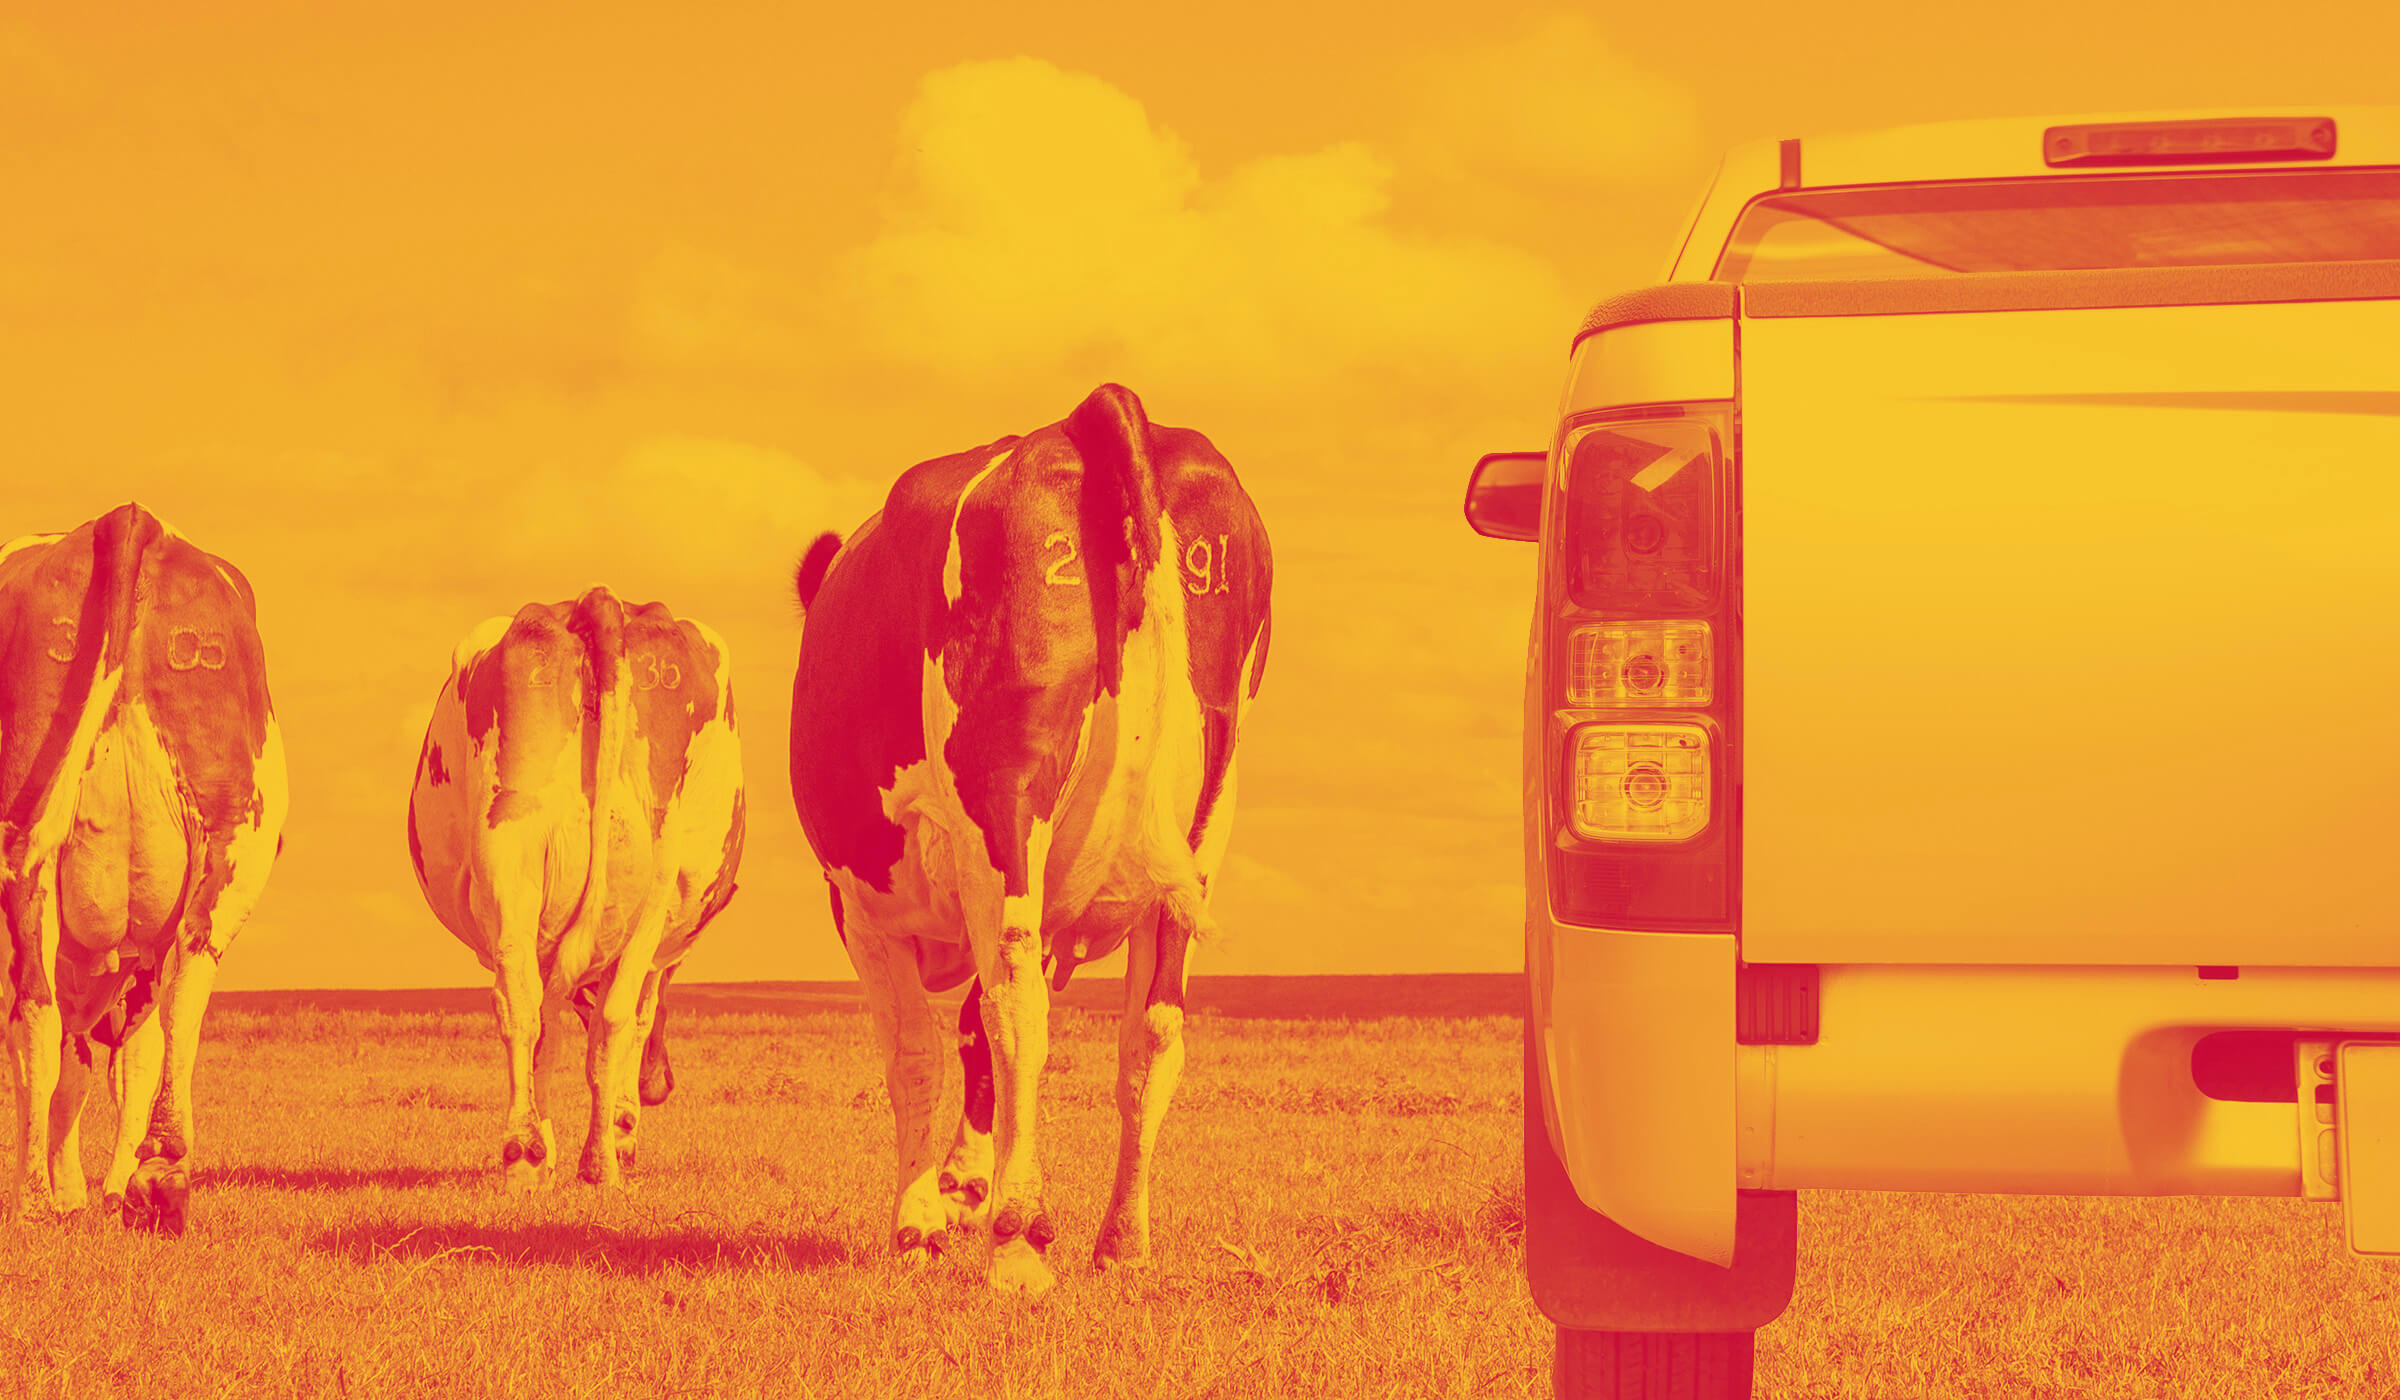 Cow and a car in a field, which is contributing more to climate change?